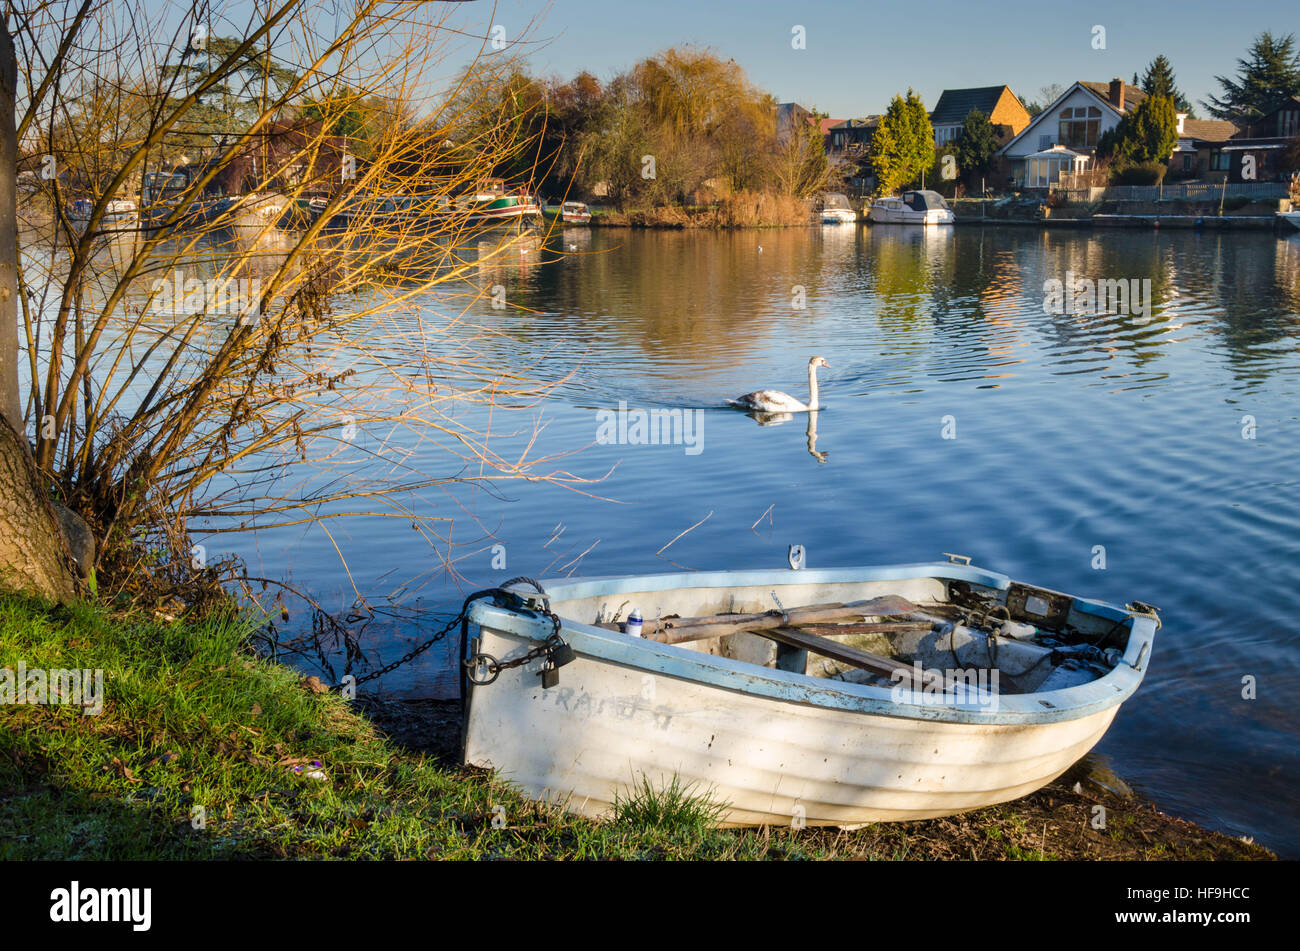 A rowing boat is chained up to a tree on the bank of The River Thames at Old Windsor in Berkshire, UK. Stock Photo